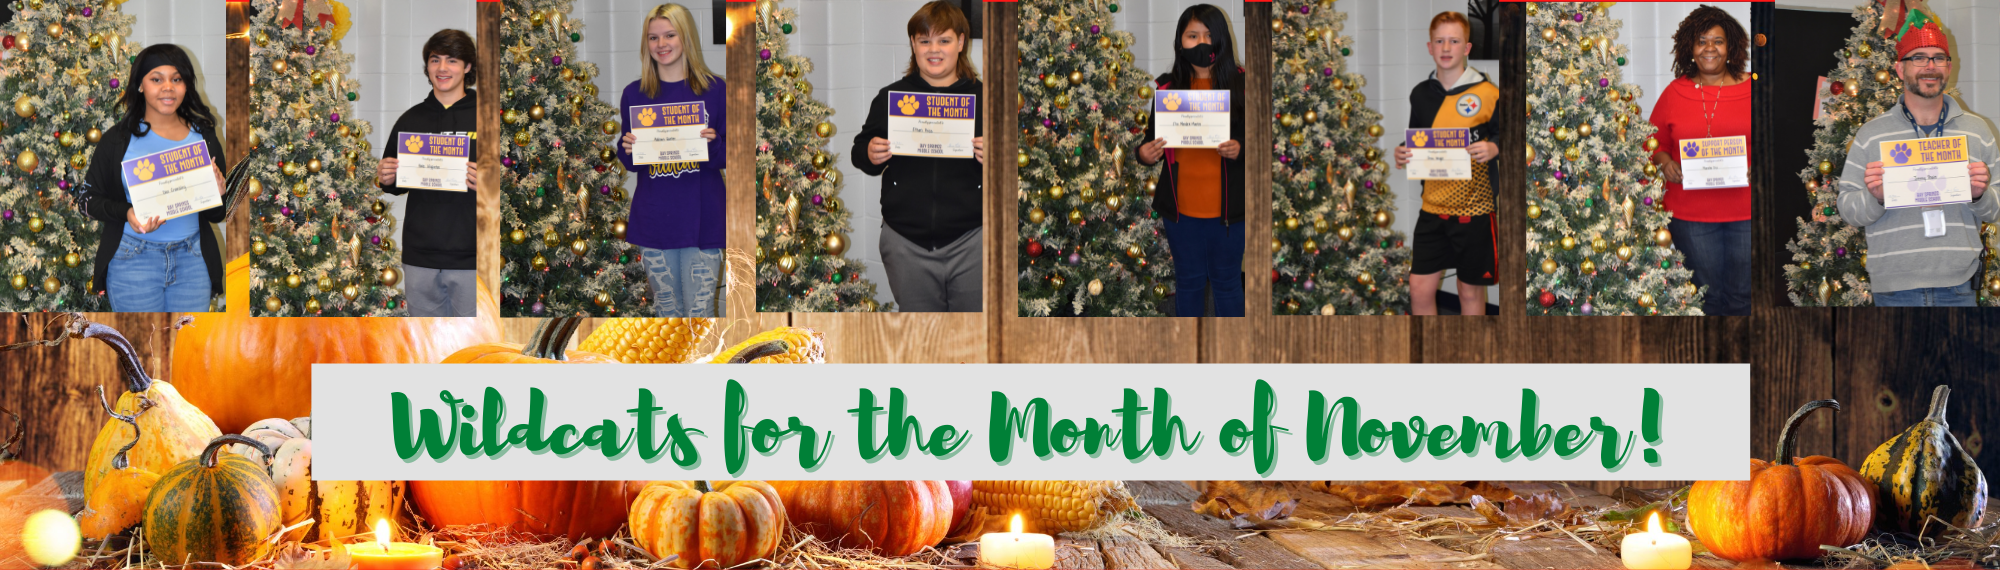 Wildcats for the month of November